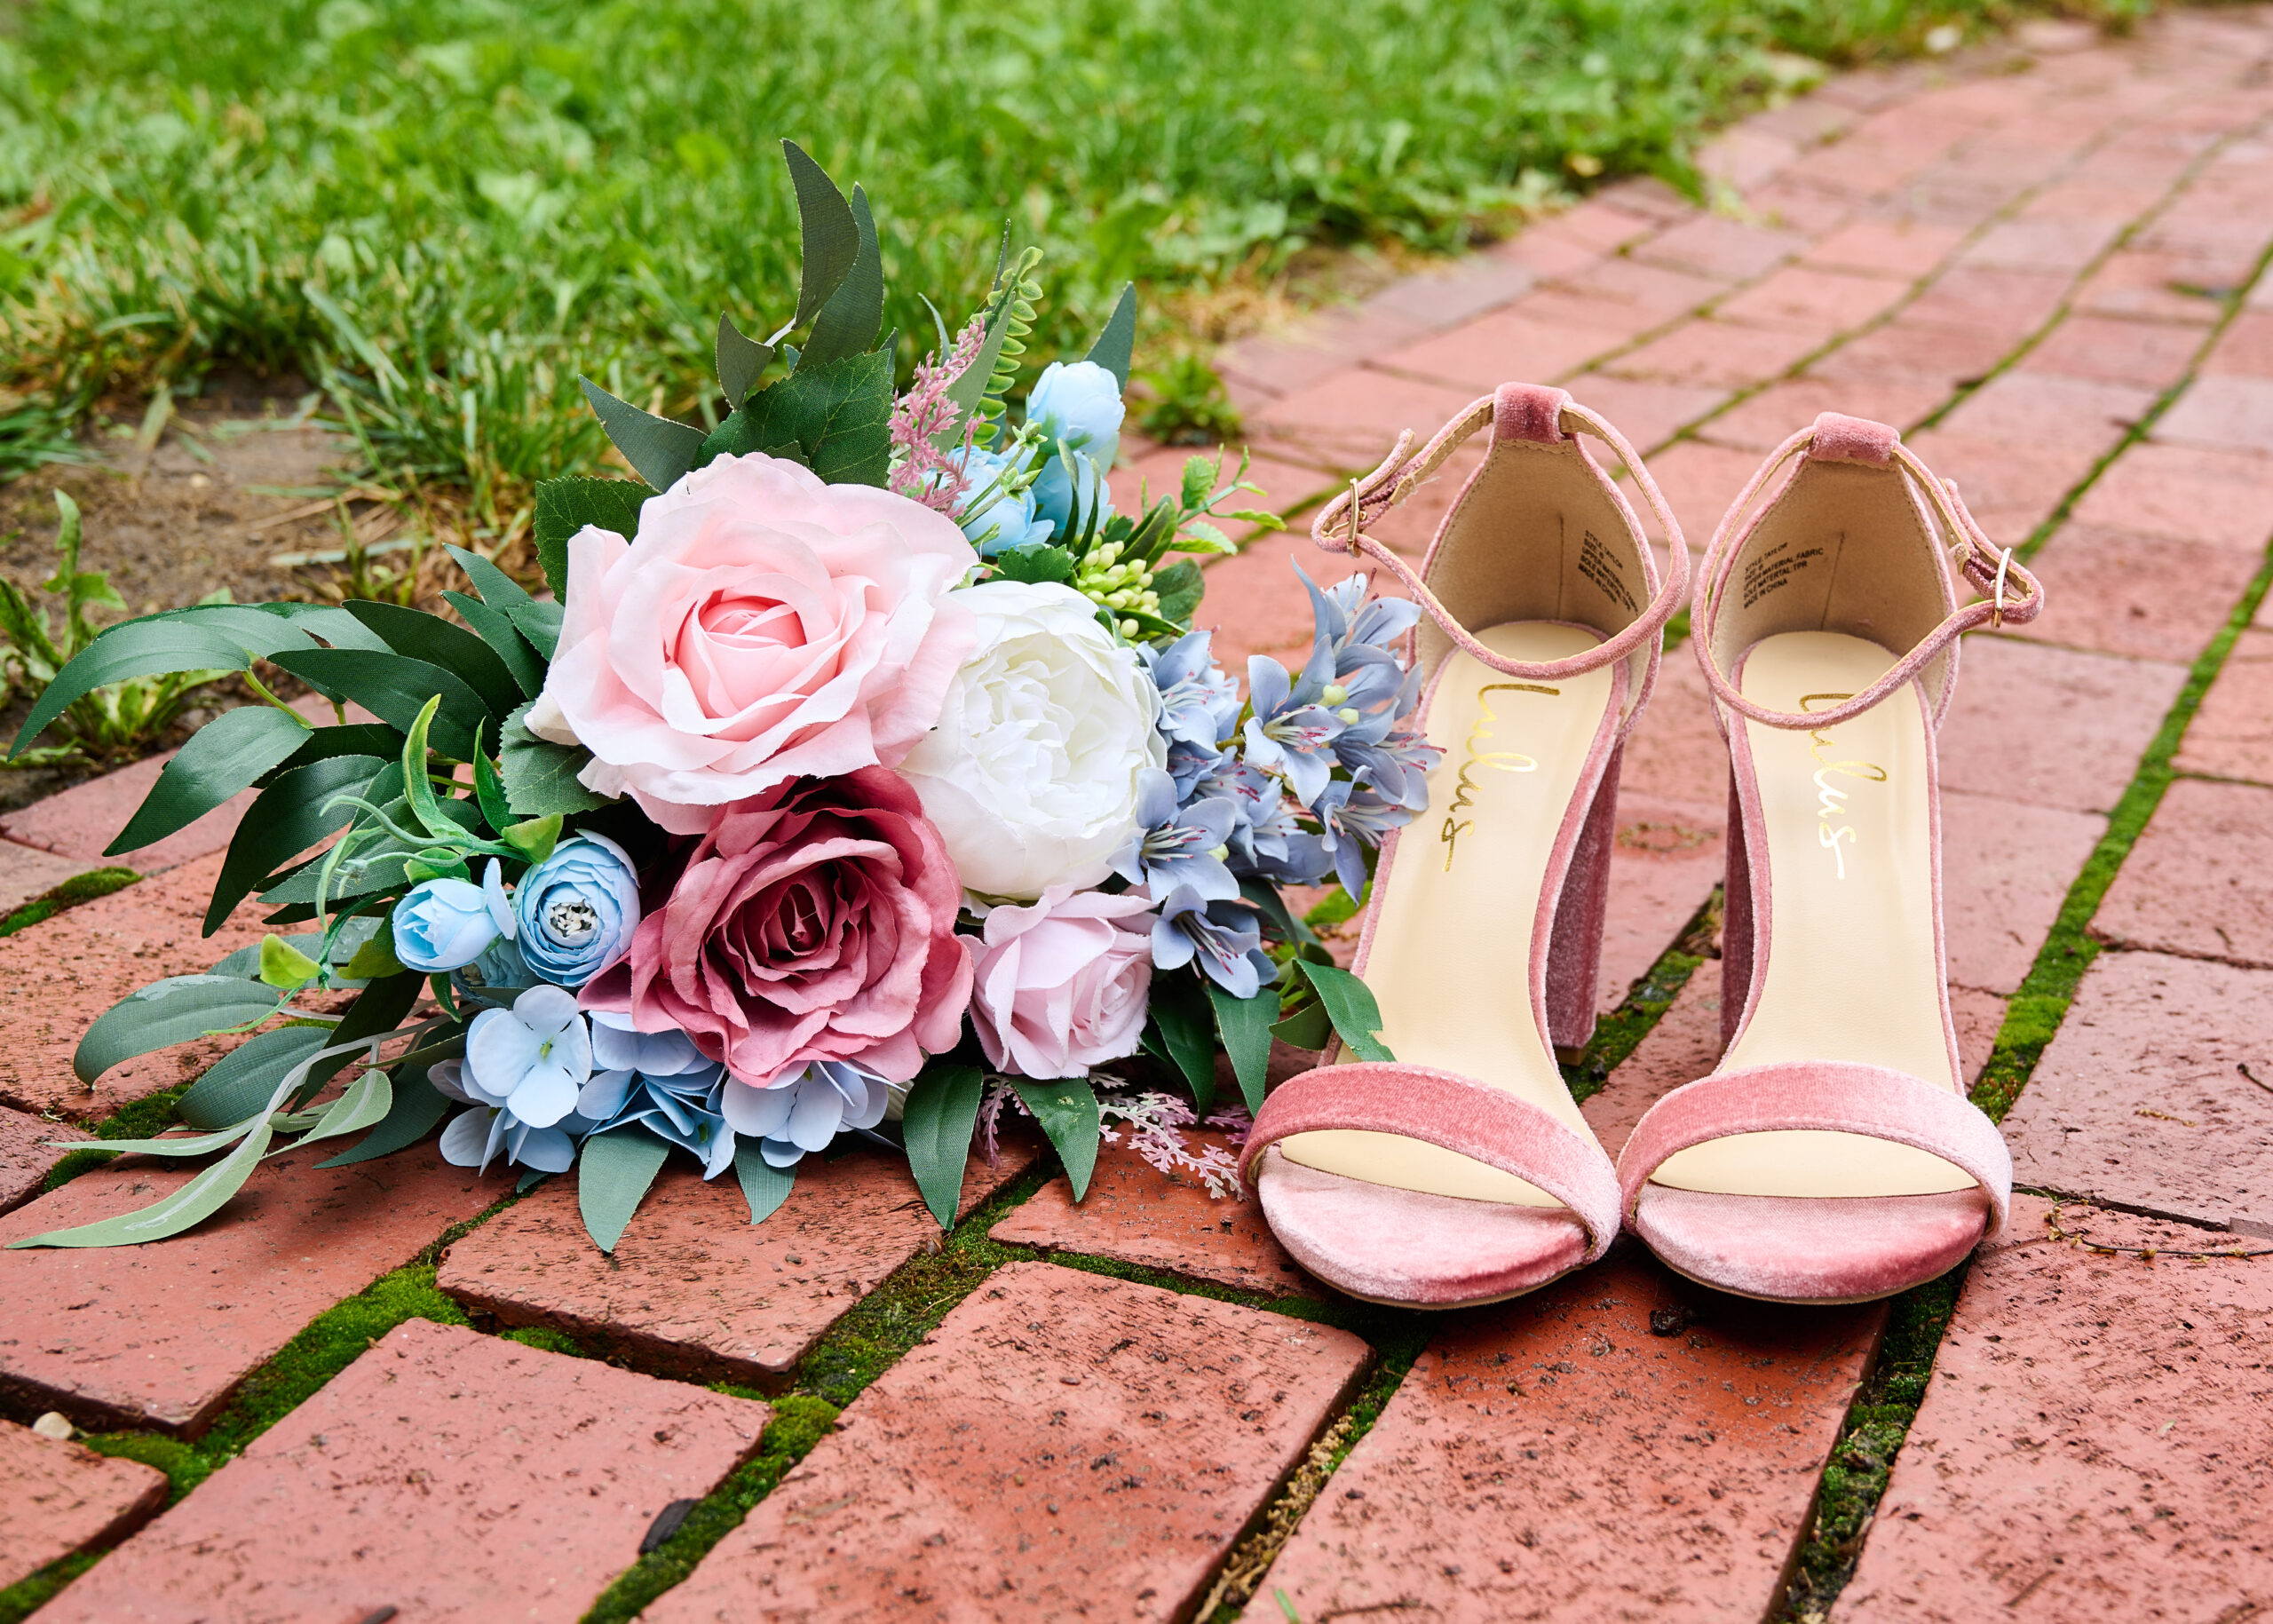 bouquet and shoes details on bricks